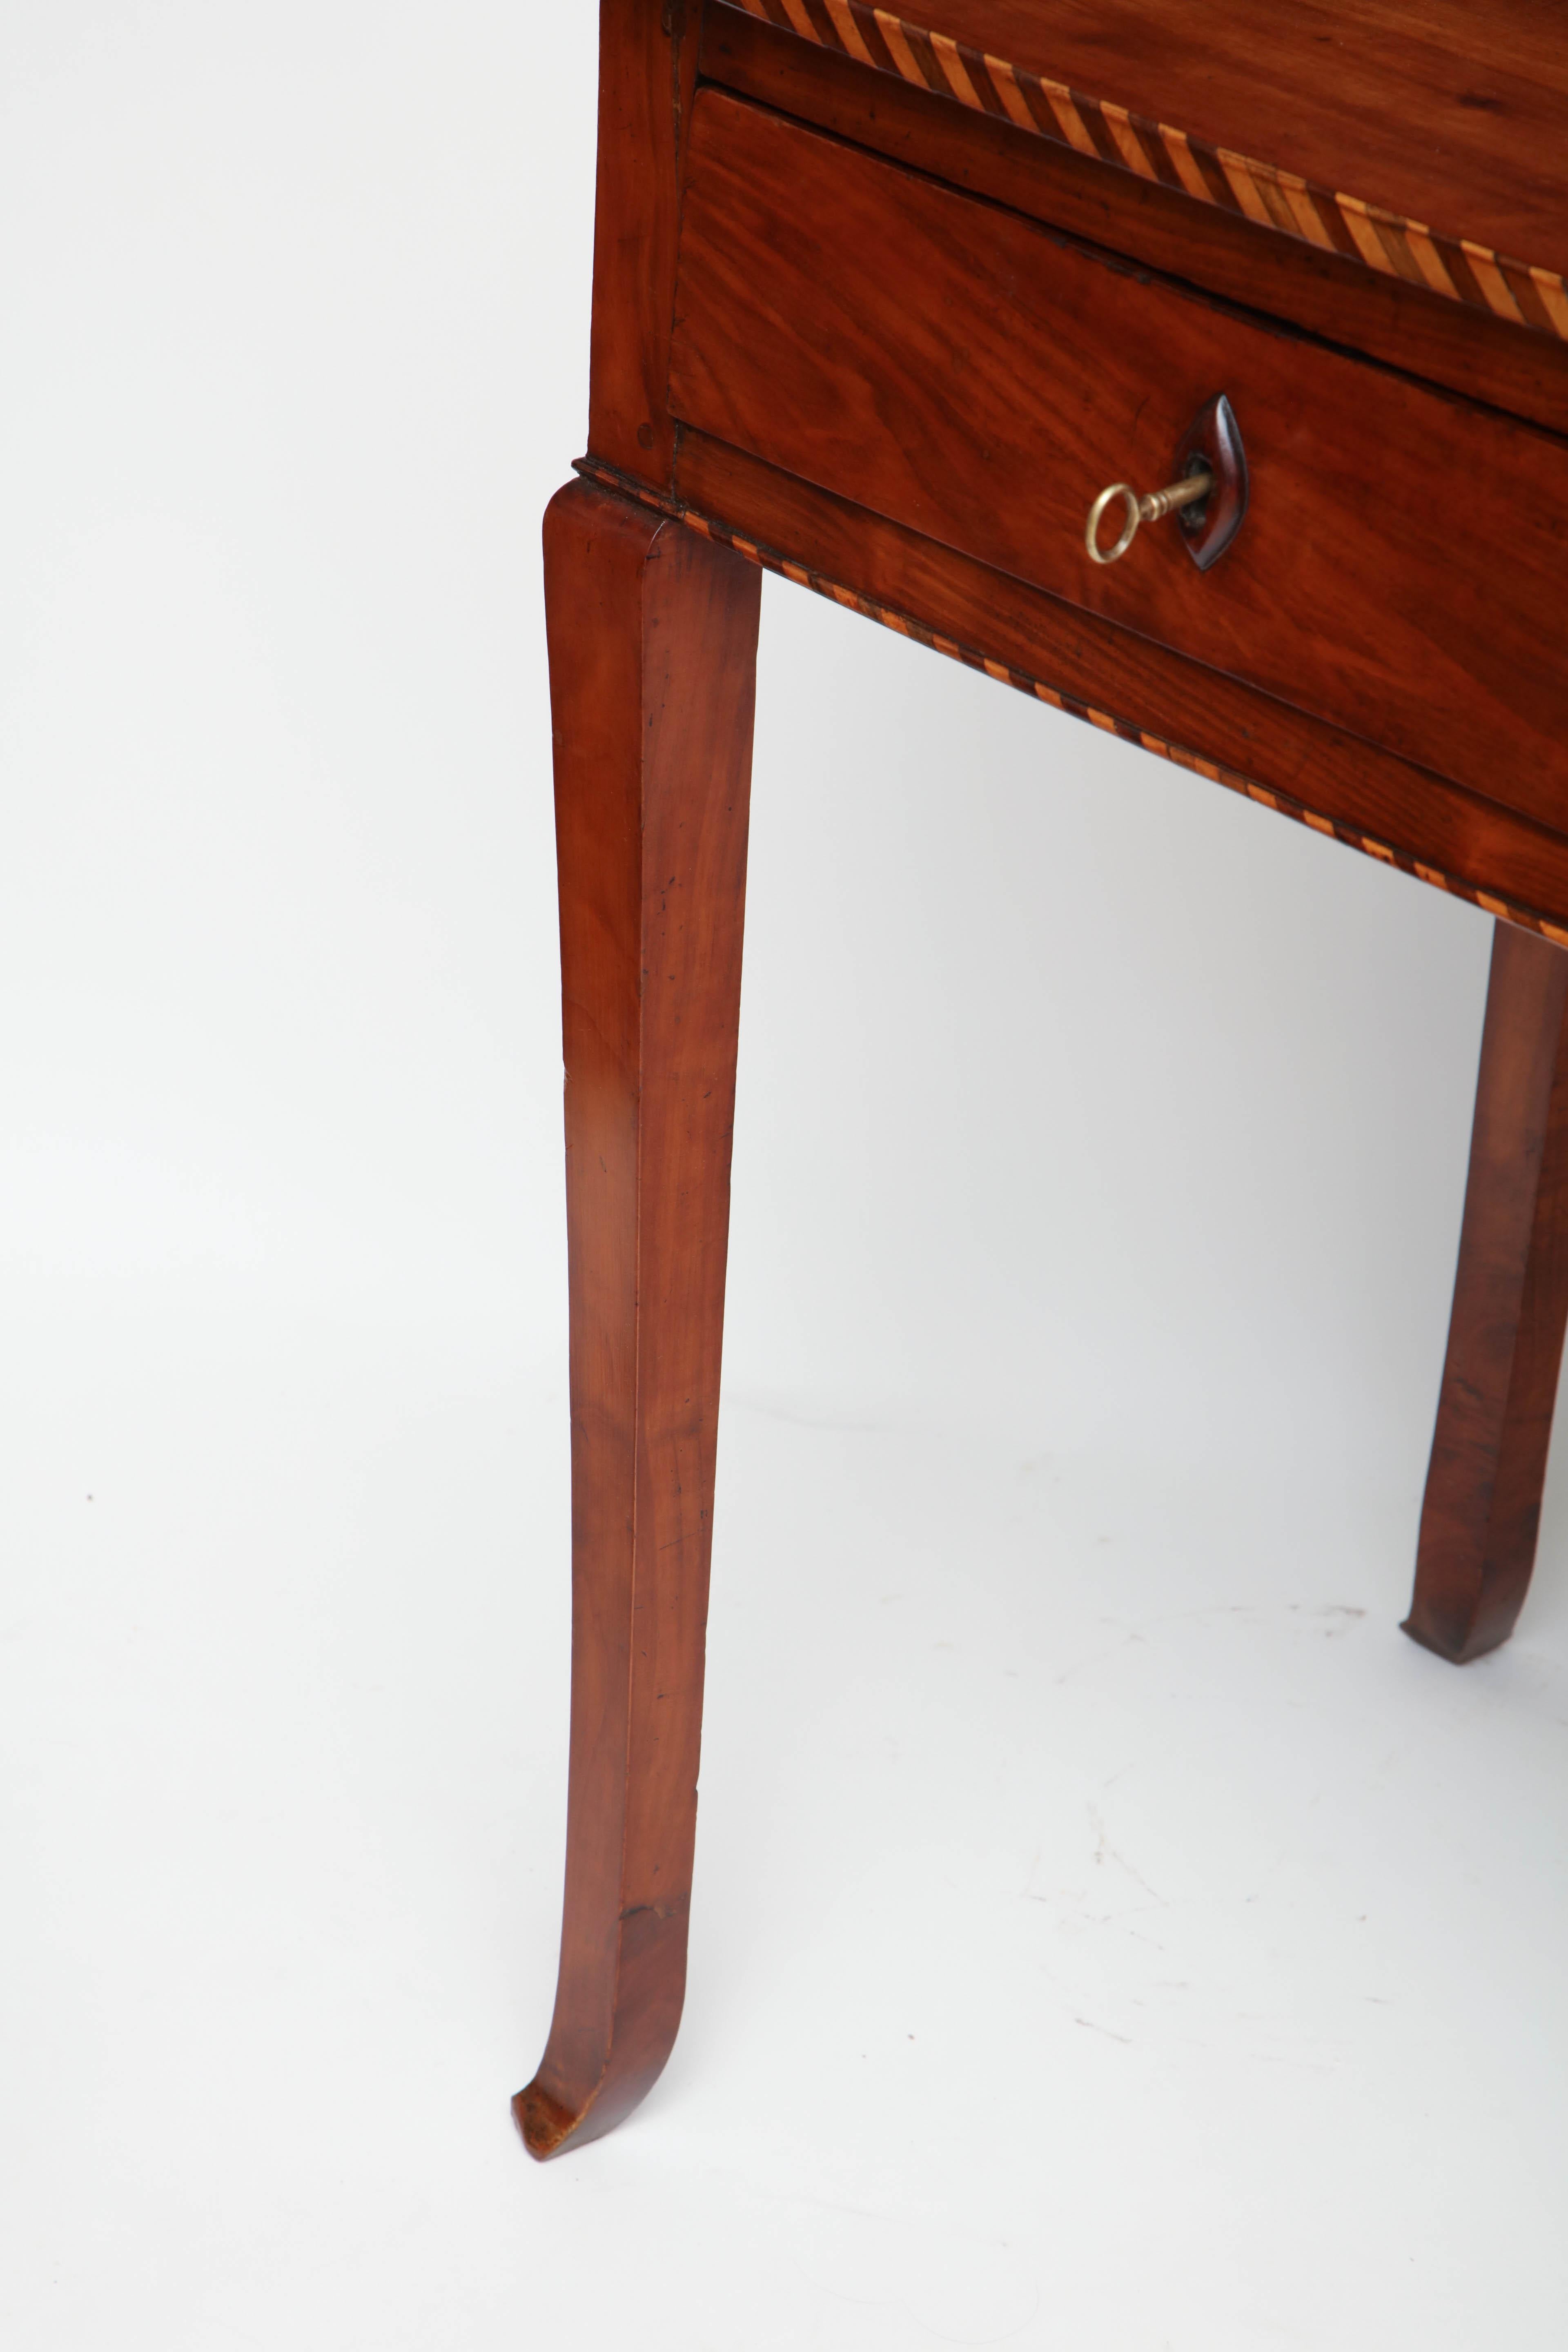 18th Century Italian Cherry Table with Parquetry Border and Two Drawers 6